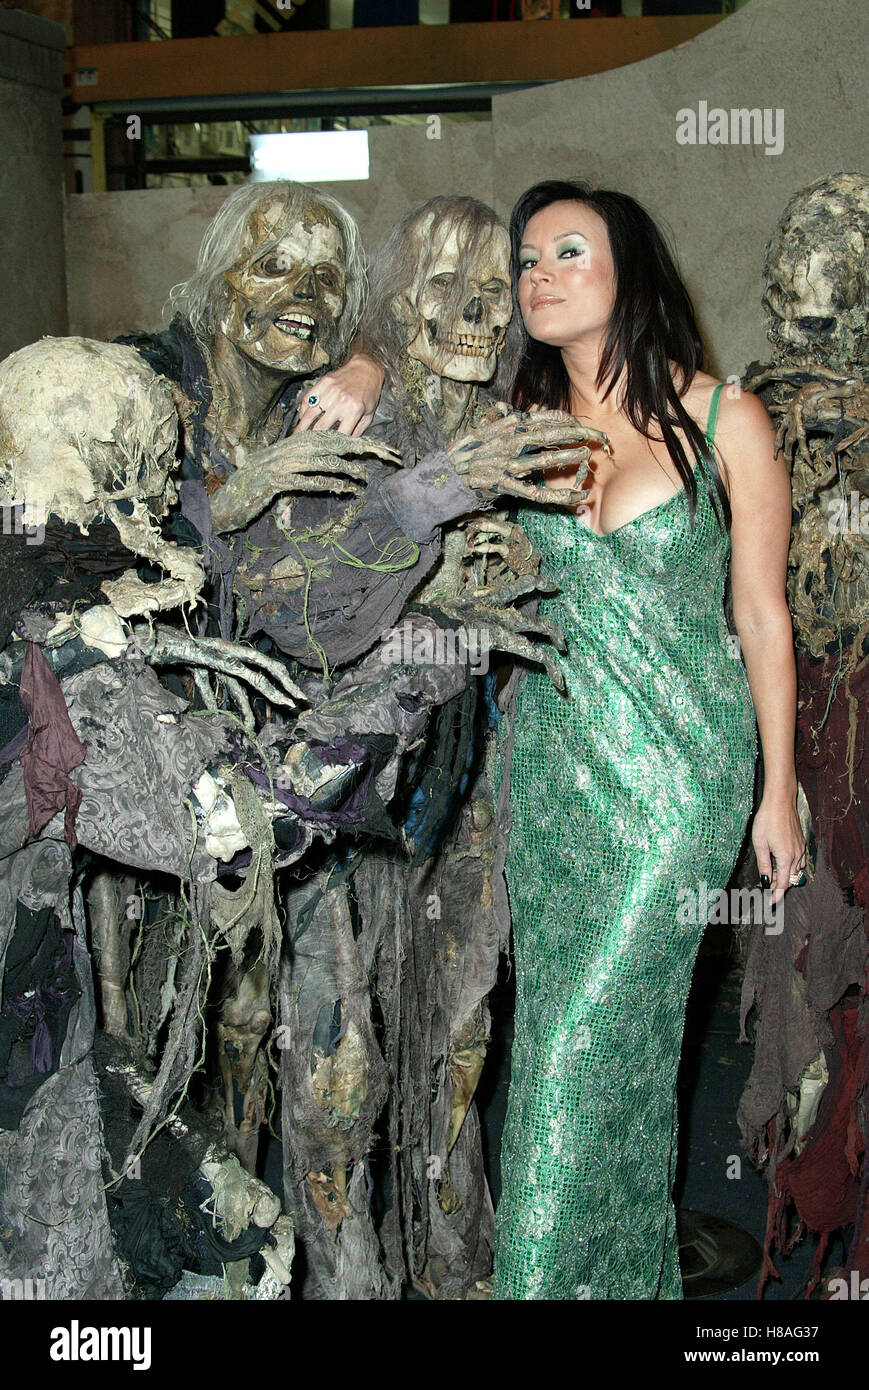 JENNIFER TILLY & THE HAUNTED MANSION SKELETONS THE HAUNTED MANSION WORLD PRE HOLLYWOOD LOS ANGELES USA 23 November 2003 Stock Photo